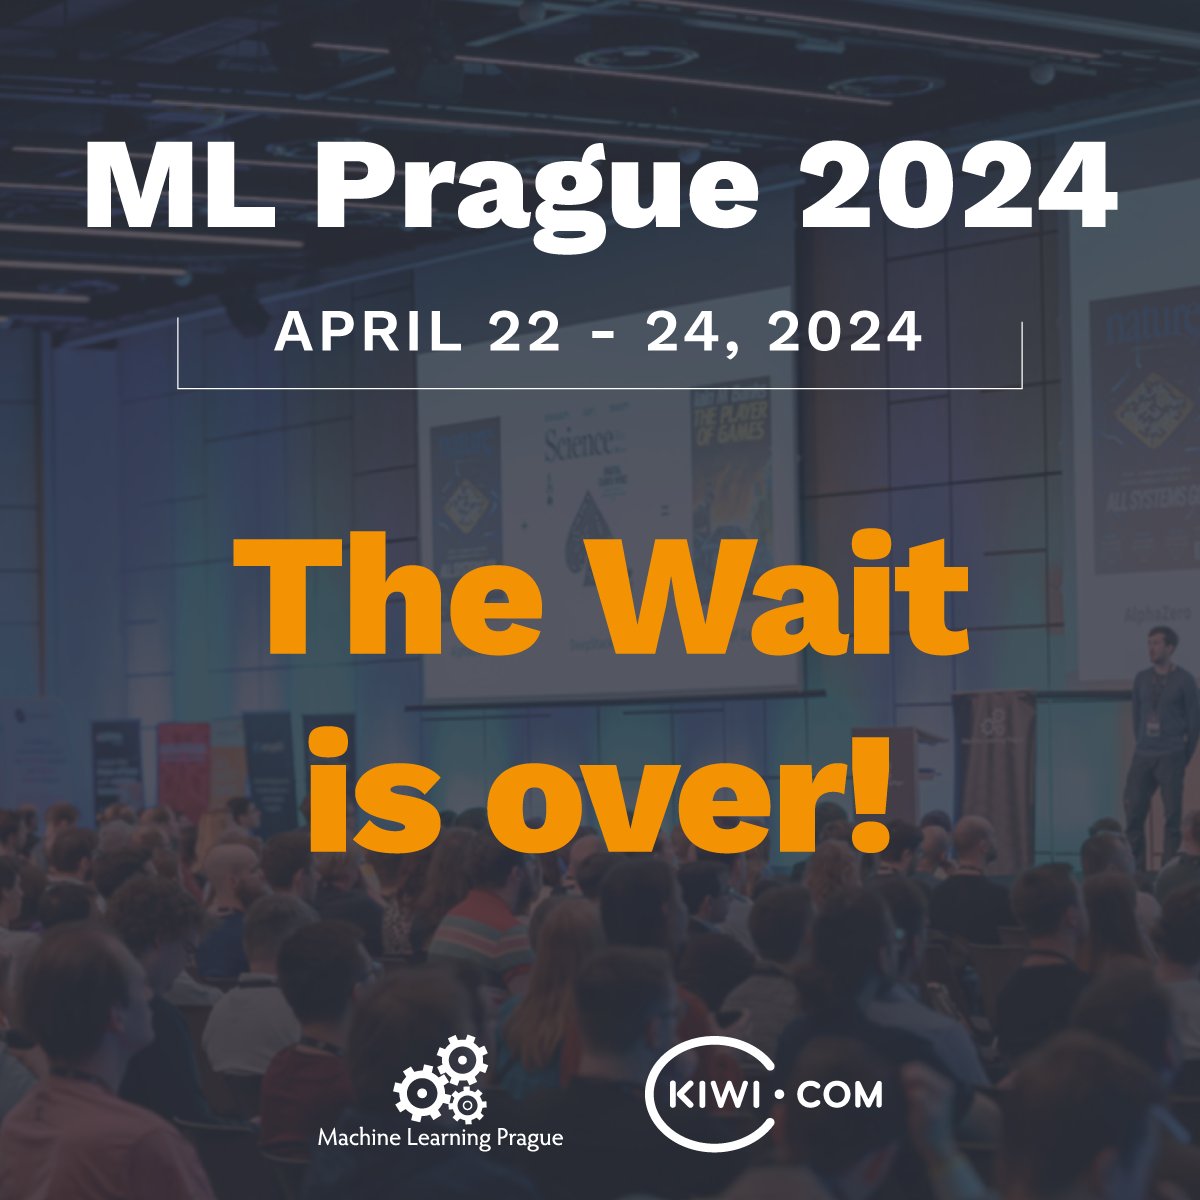 The biggest ML Prague conference ever kicks off today, featuring 11 advanced presentations on the business applications of ML and AI. We're excited to welcome you both in person and online! #mlprague #mlconference #aiconference #machinelearning #AI #conferences2024 #conference